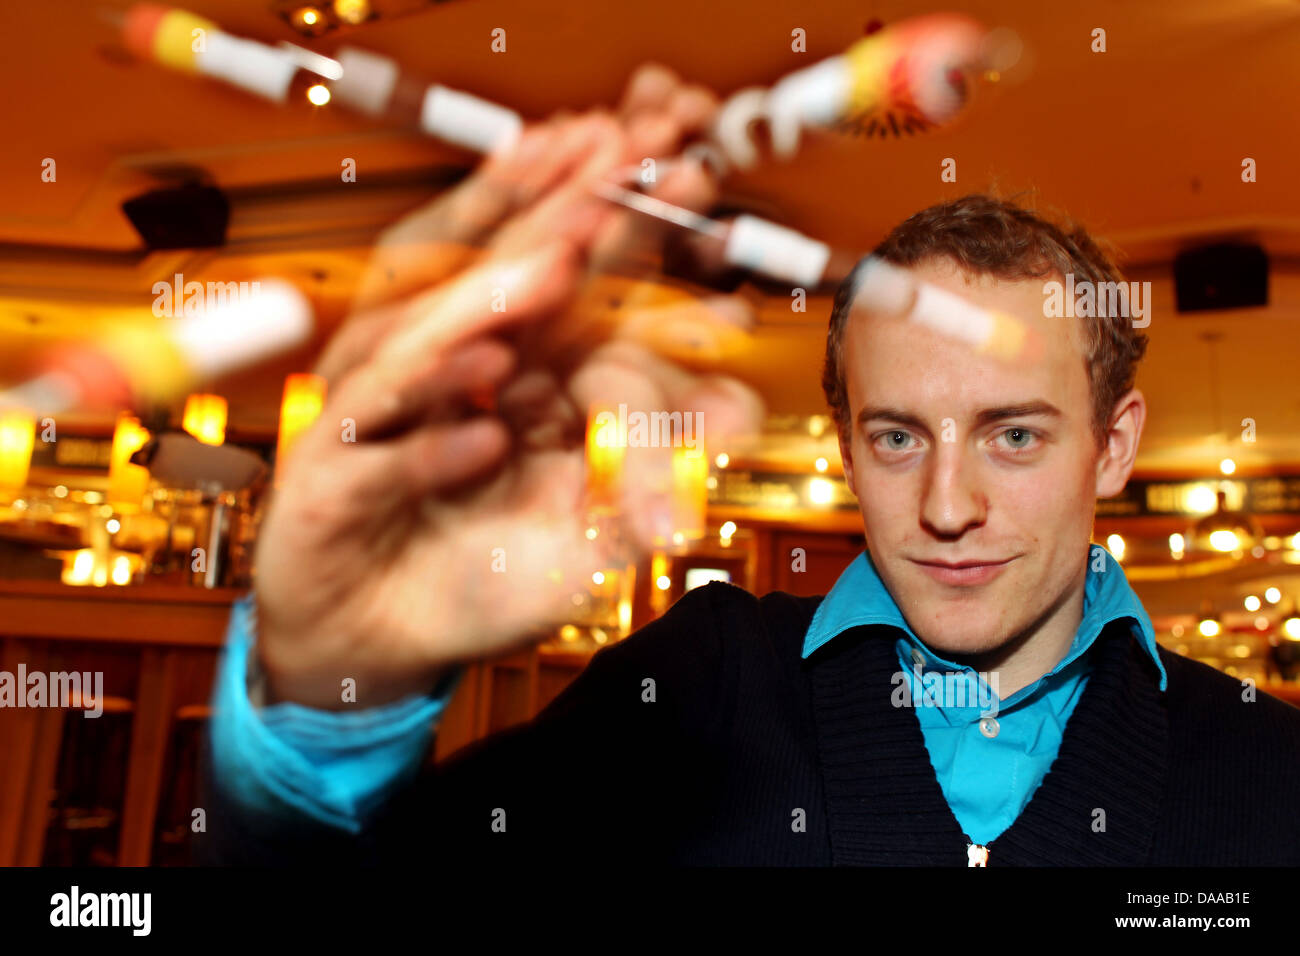 Penspinner Rober Hein presents a trick in Aachen, Germany, 14 January 2011.  The 24-year-old is the most famous German pen-spinning artist. The  acrobatic tricks with pens are not only fun to do,